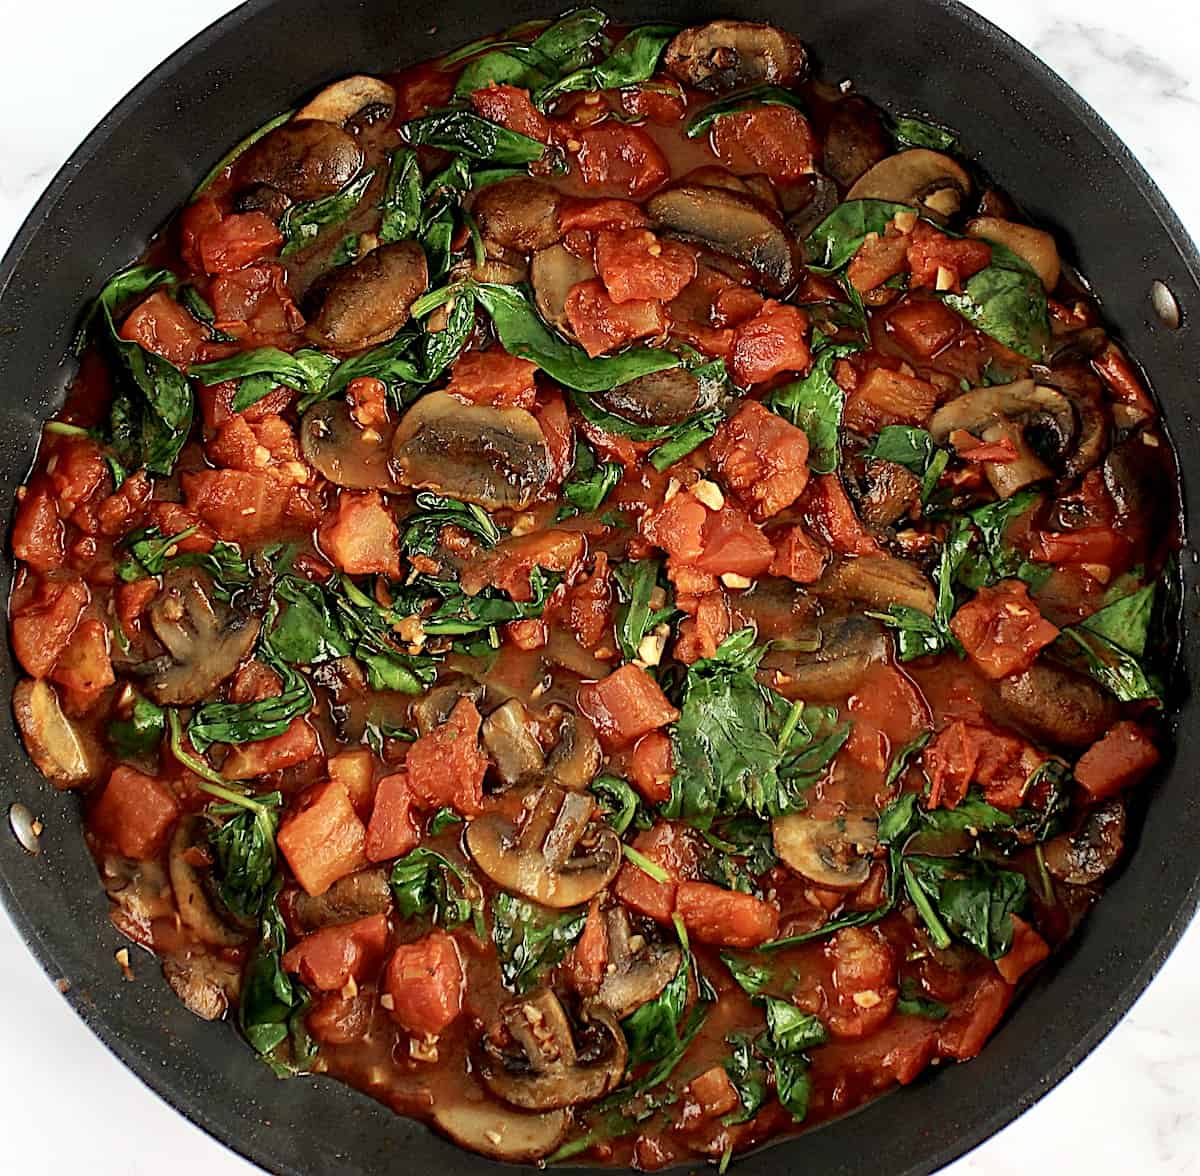 sautéed spinach, mushrooms and tomatoes in skillet